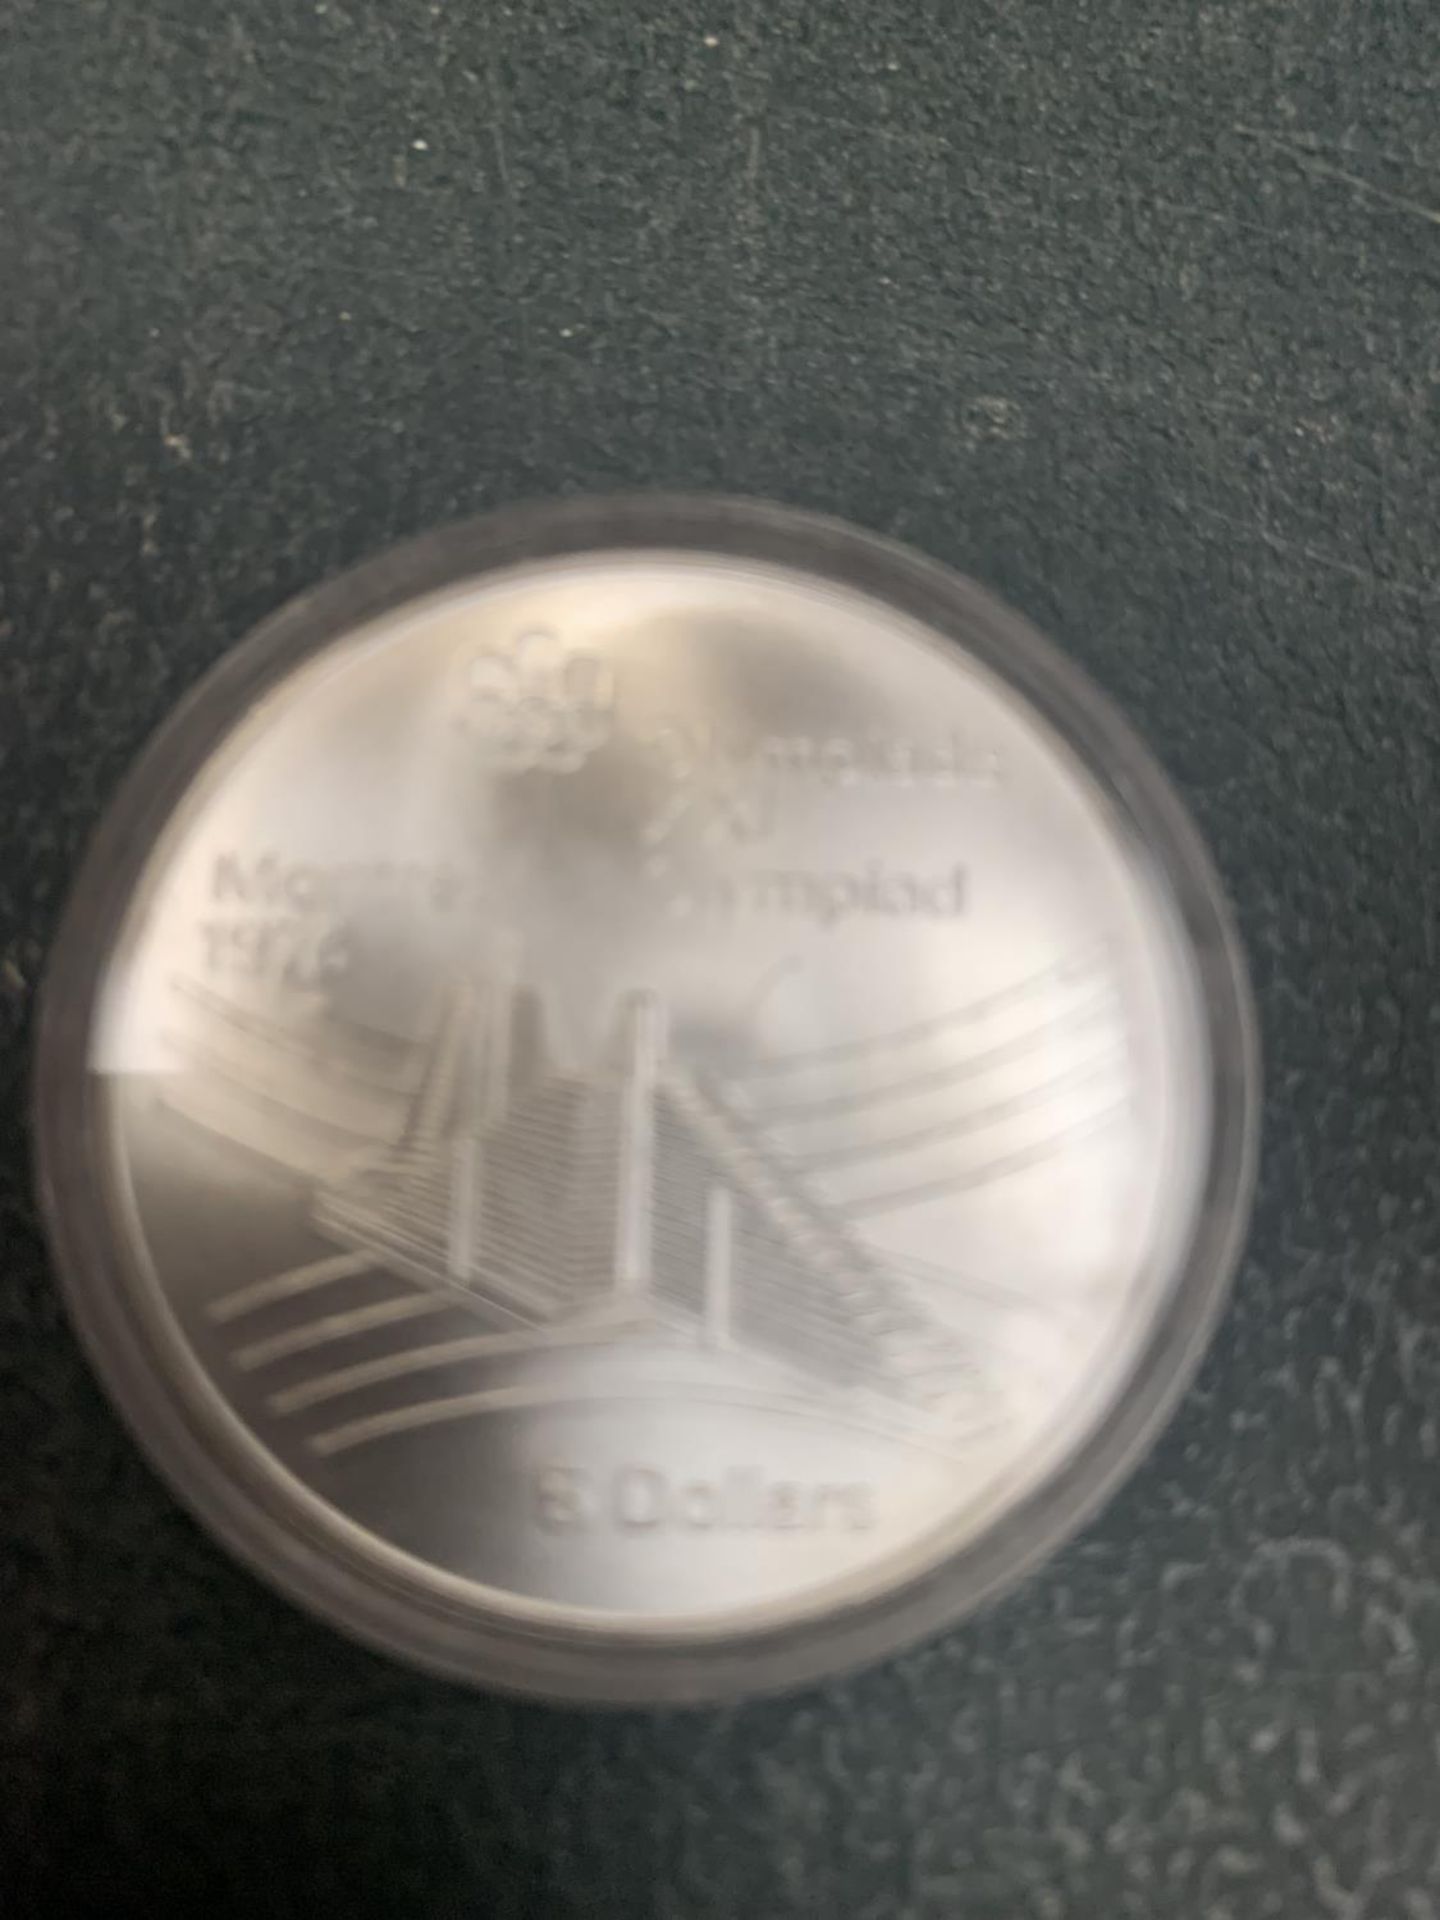 A 1976 MONTREAL OLYMPICS SILVER 5 DOLLAR